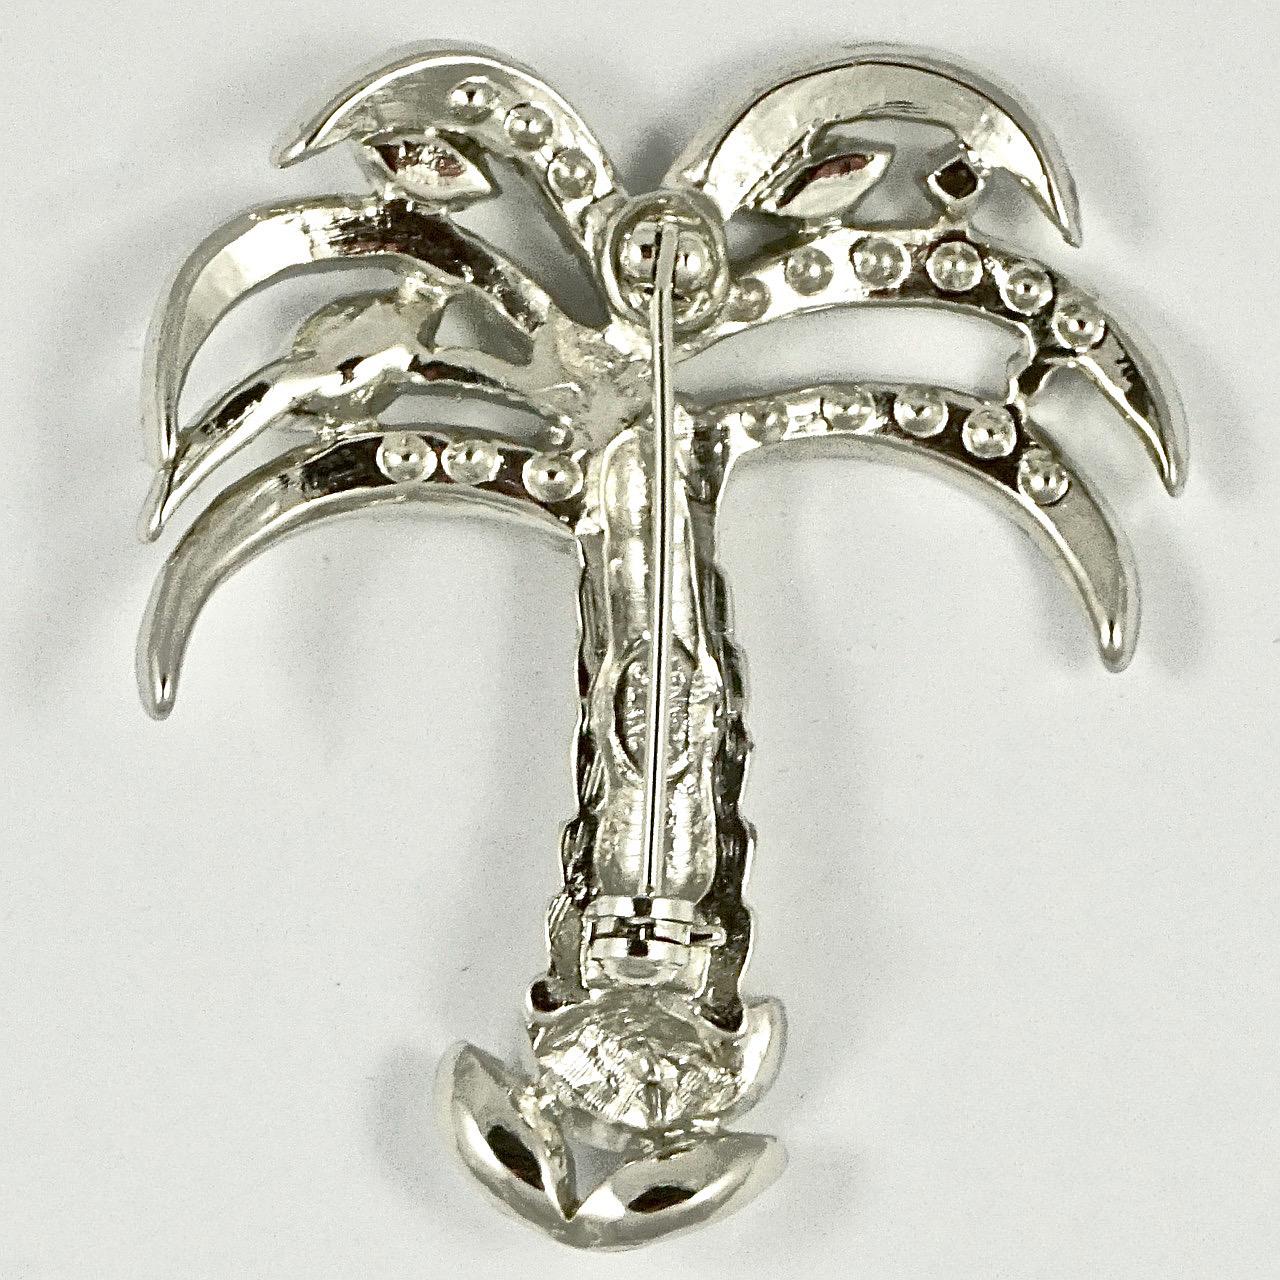 Wonderful Kenneth Jay Lane silver plated palm tree brooch, set with marquise and round rhinestones. Measuring length 4.8cm / 1.88 inches by width 4.1cm / 1.6 inches. The brooch is in very good condition.

This is a stylish sparkling rhinestone